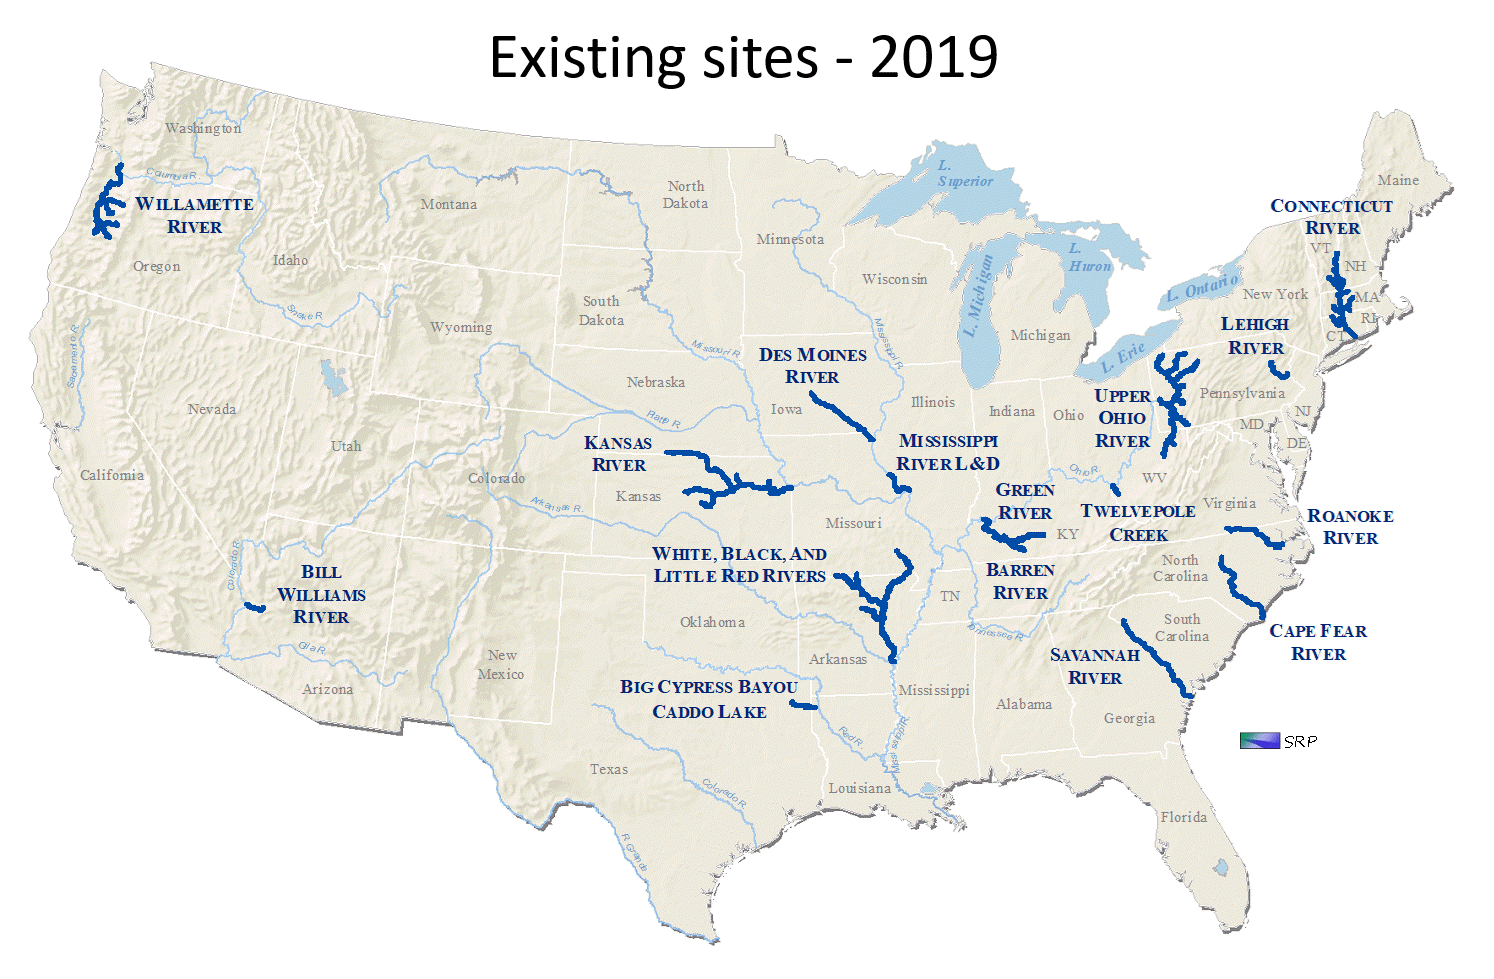 Sustainable Rivers is an ongoing national program to increase environmental benefits provided by Corps already built water resources projects. As of 2019, Sustainable Rivers involved work on 66 Corps reservoirs in 16 river systems and 5,083 river miles.